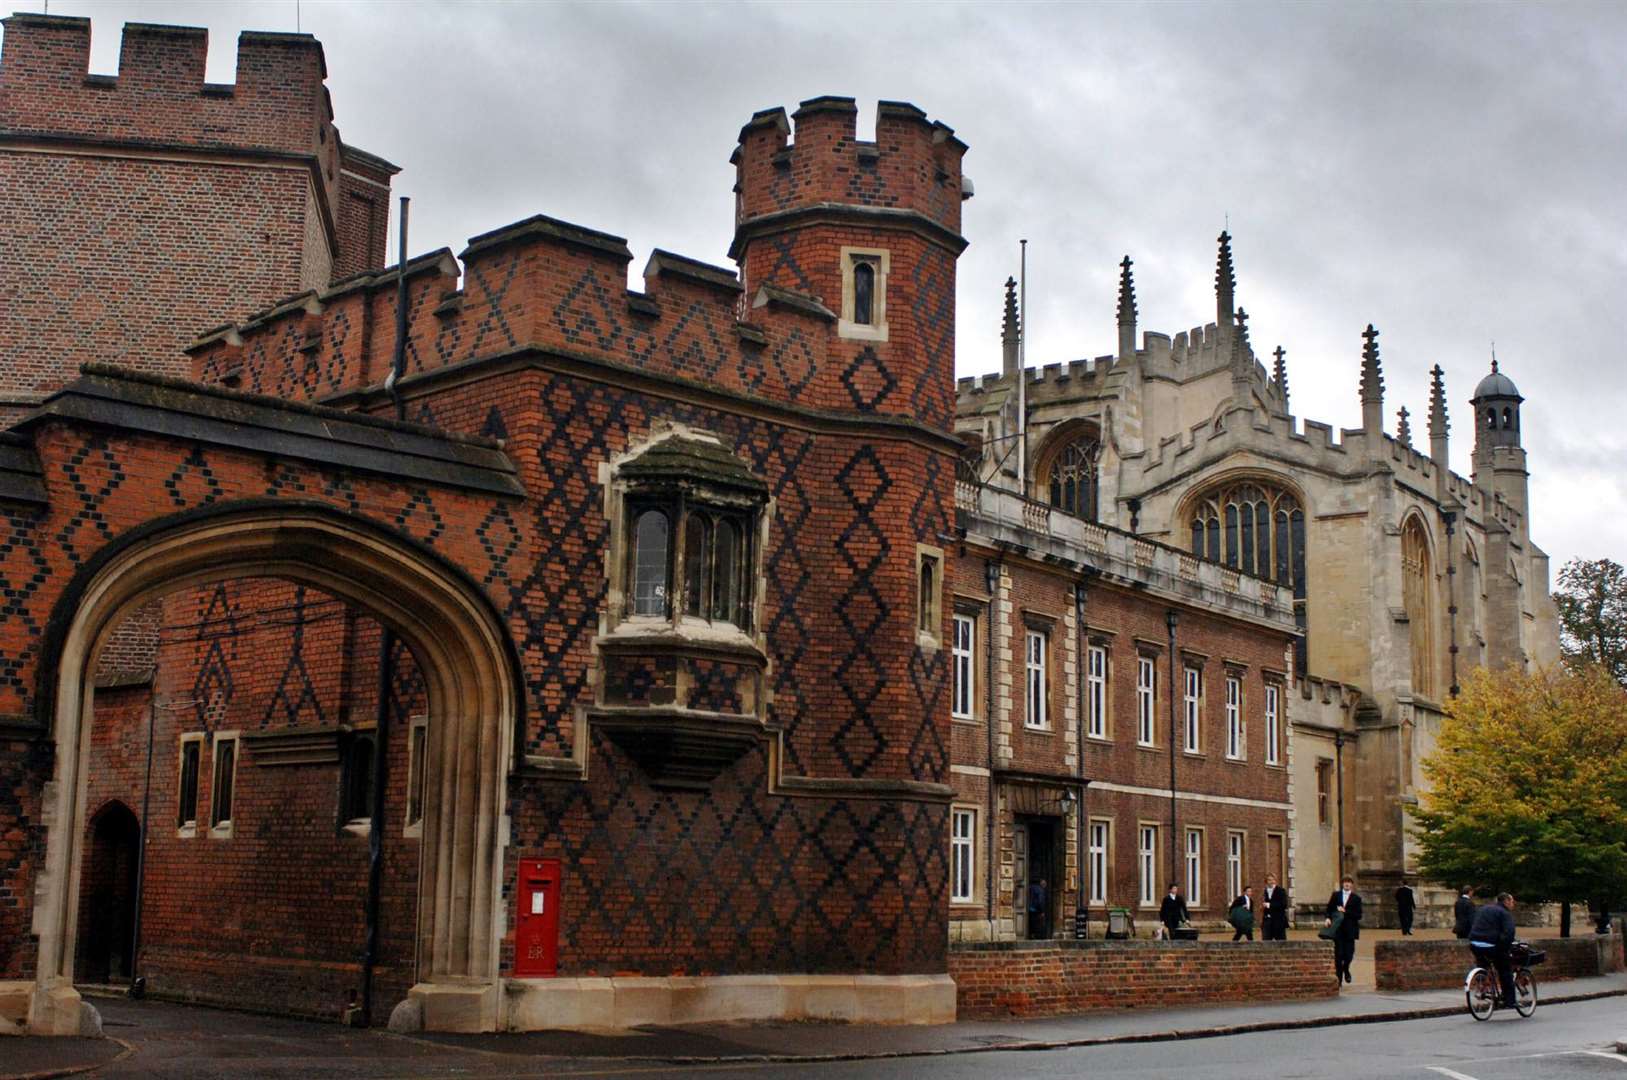 The provost of Eton College is appointed on the advice of the prime minister (Matthew Fearn/PA)